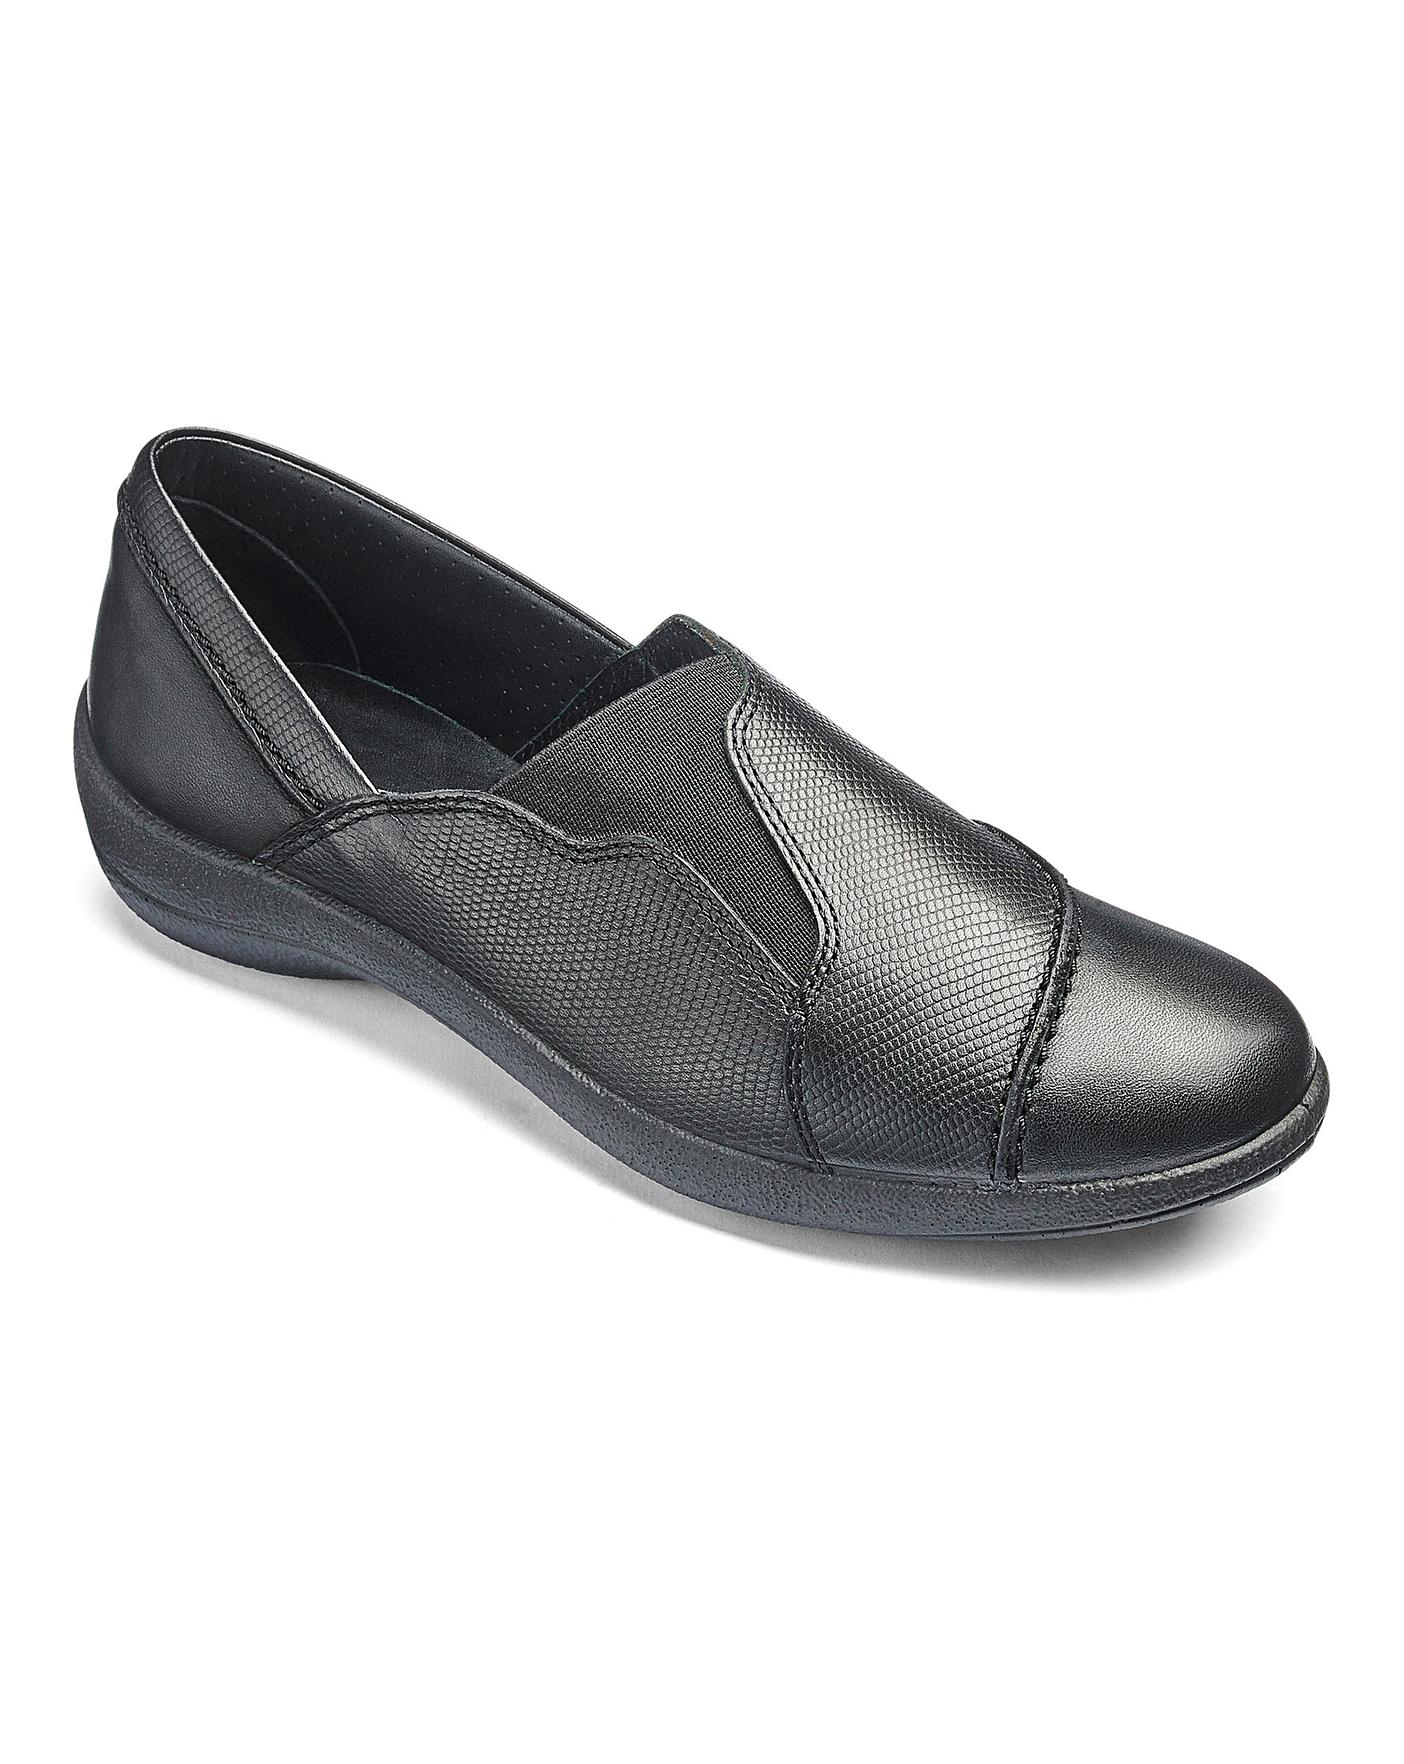 Padders Slip On Shoes E Fit | Oxendales